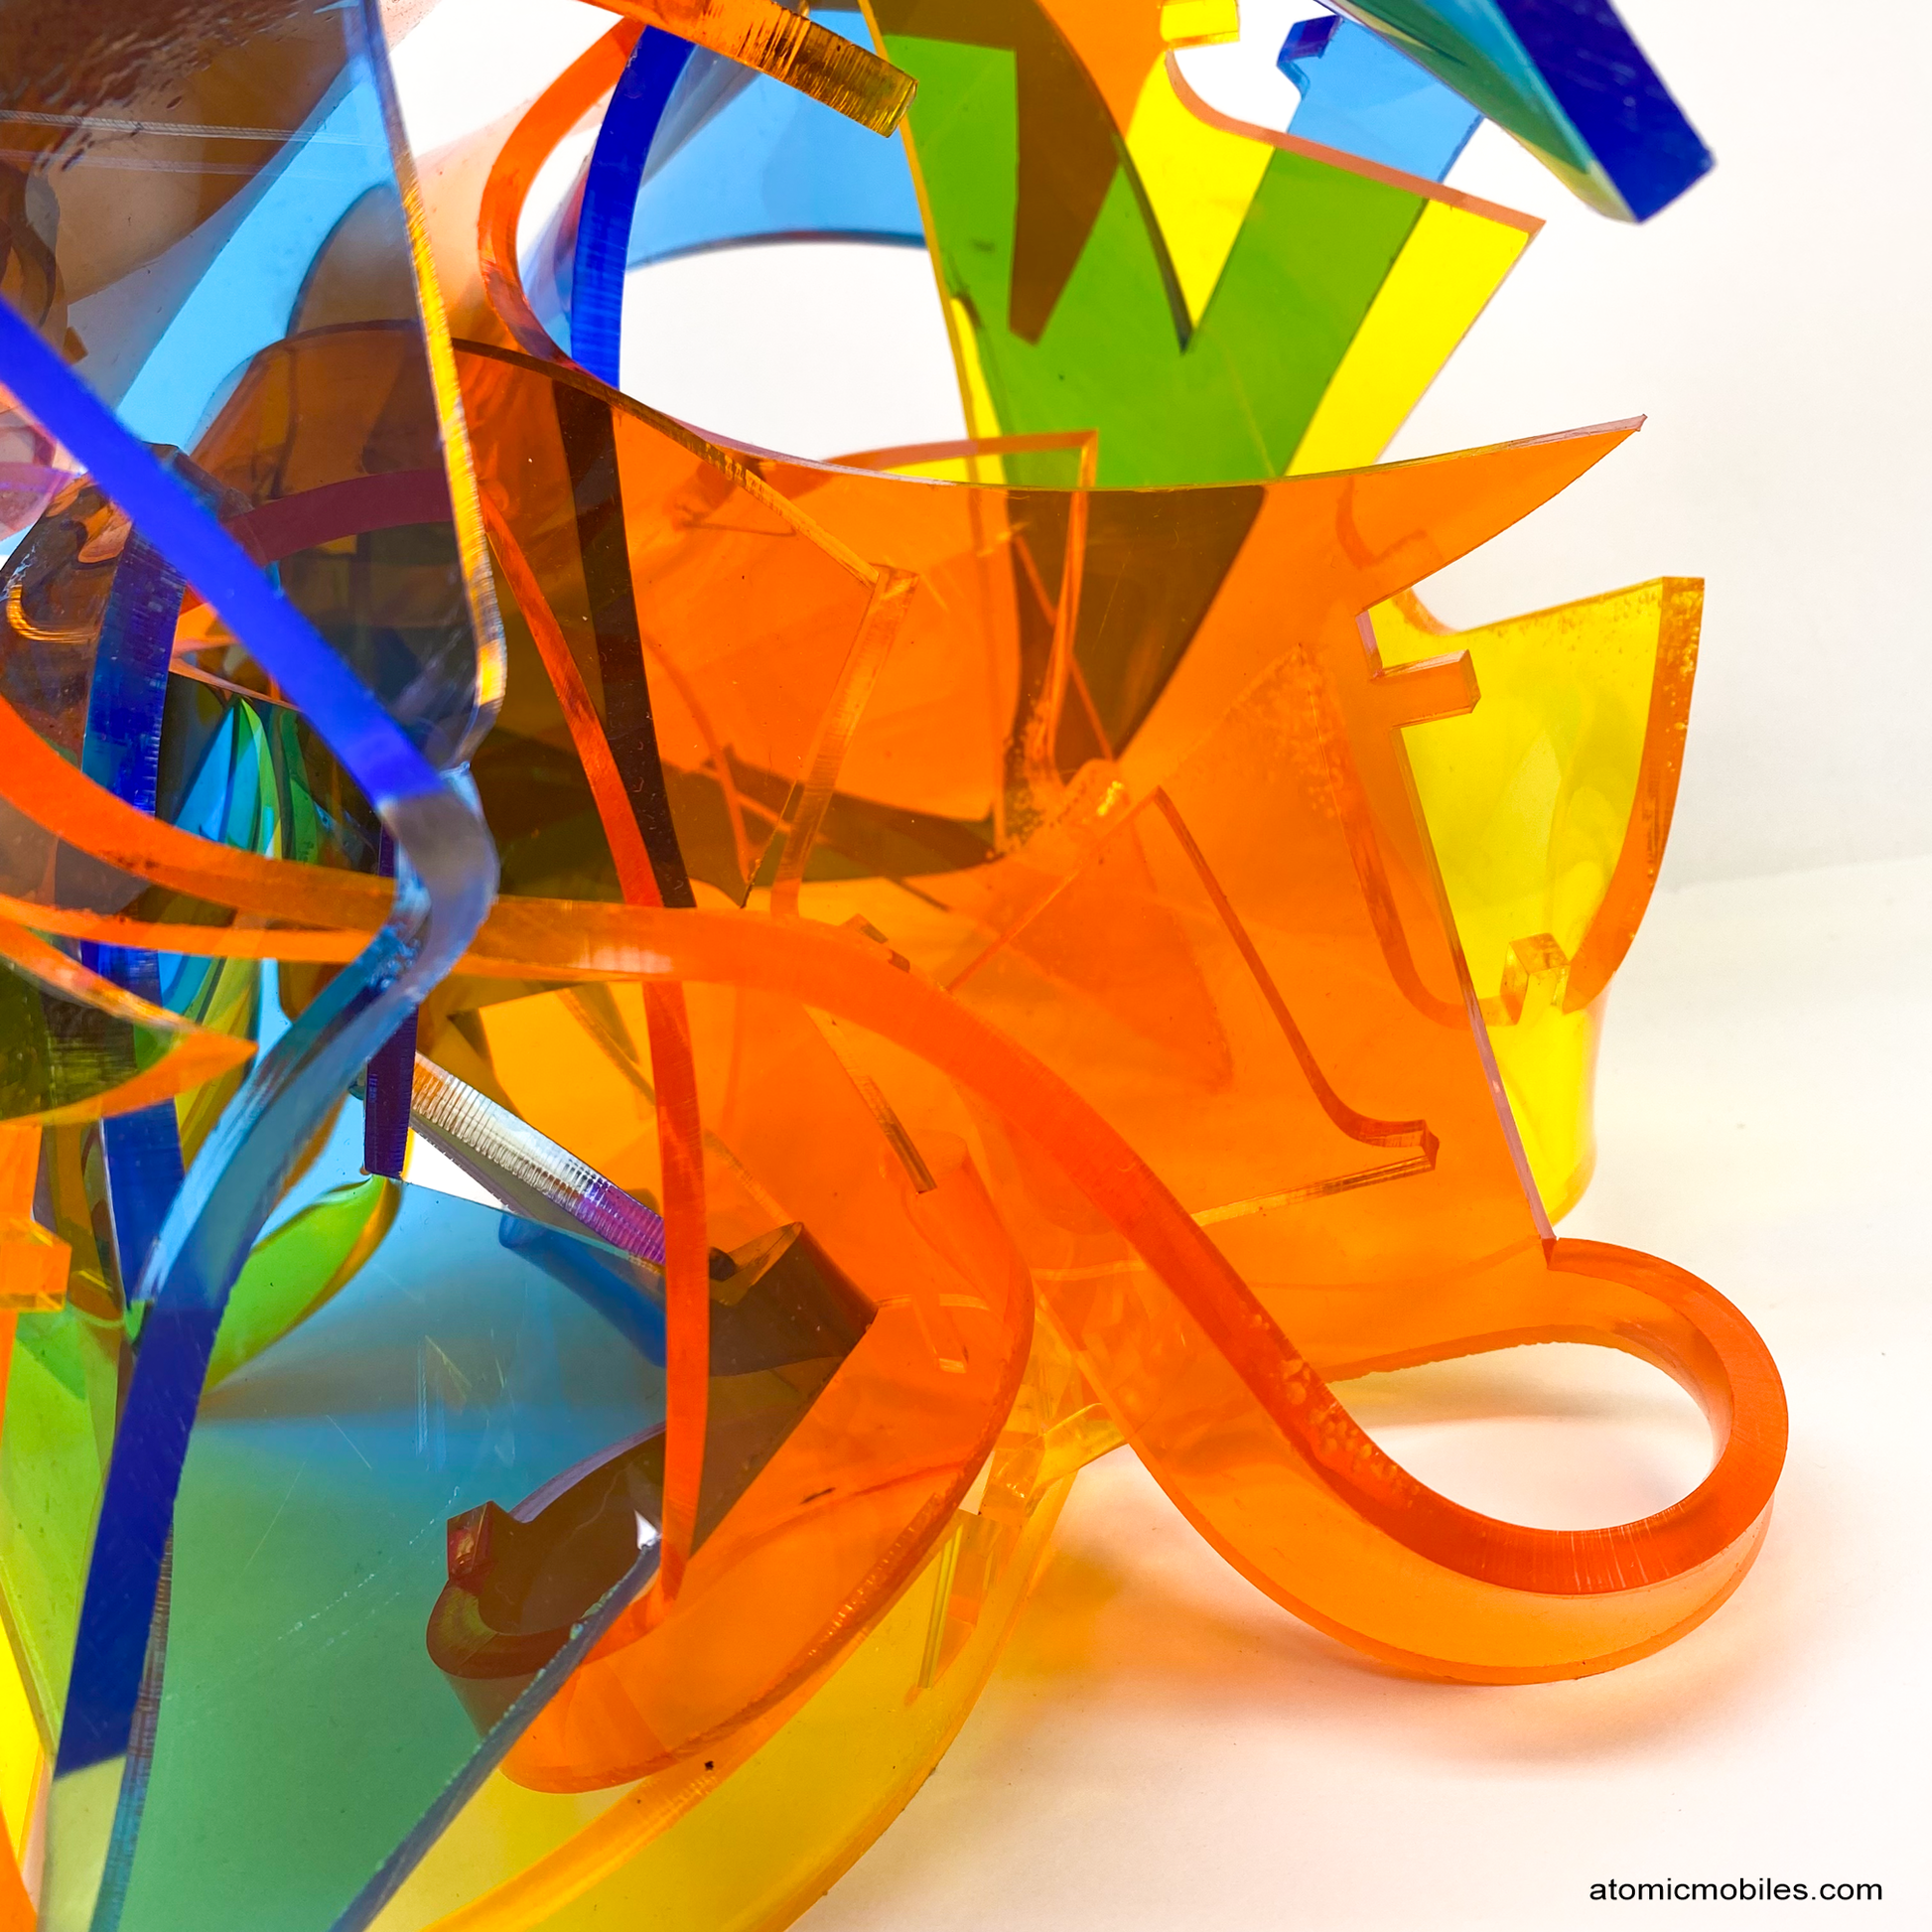 Closeup of mesmerizing Euphoria colorful abstract plexiglass acrylic abstract art sculpture in tranparent orange, yellow, blue - one of a kind modern art by AtomicMobiles.com